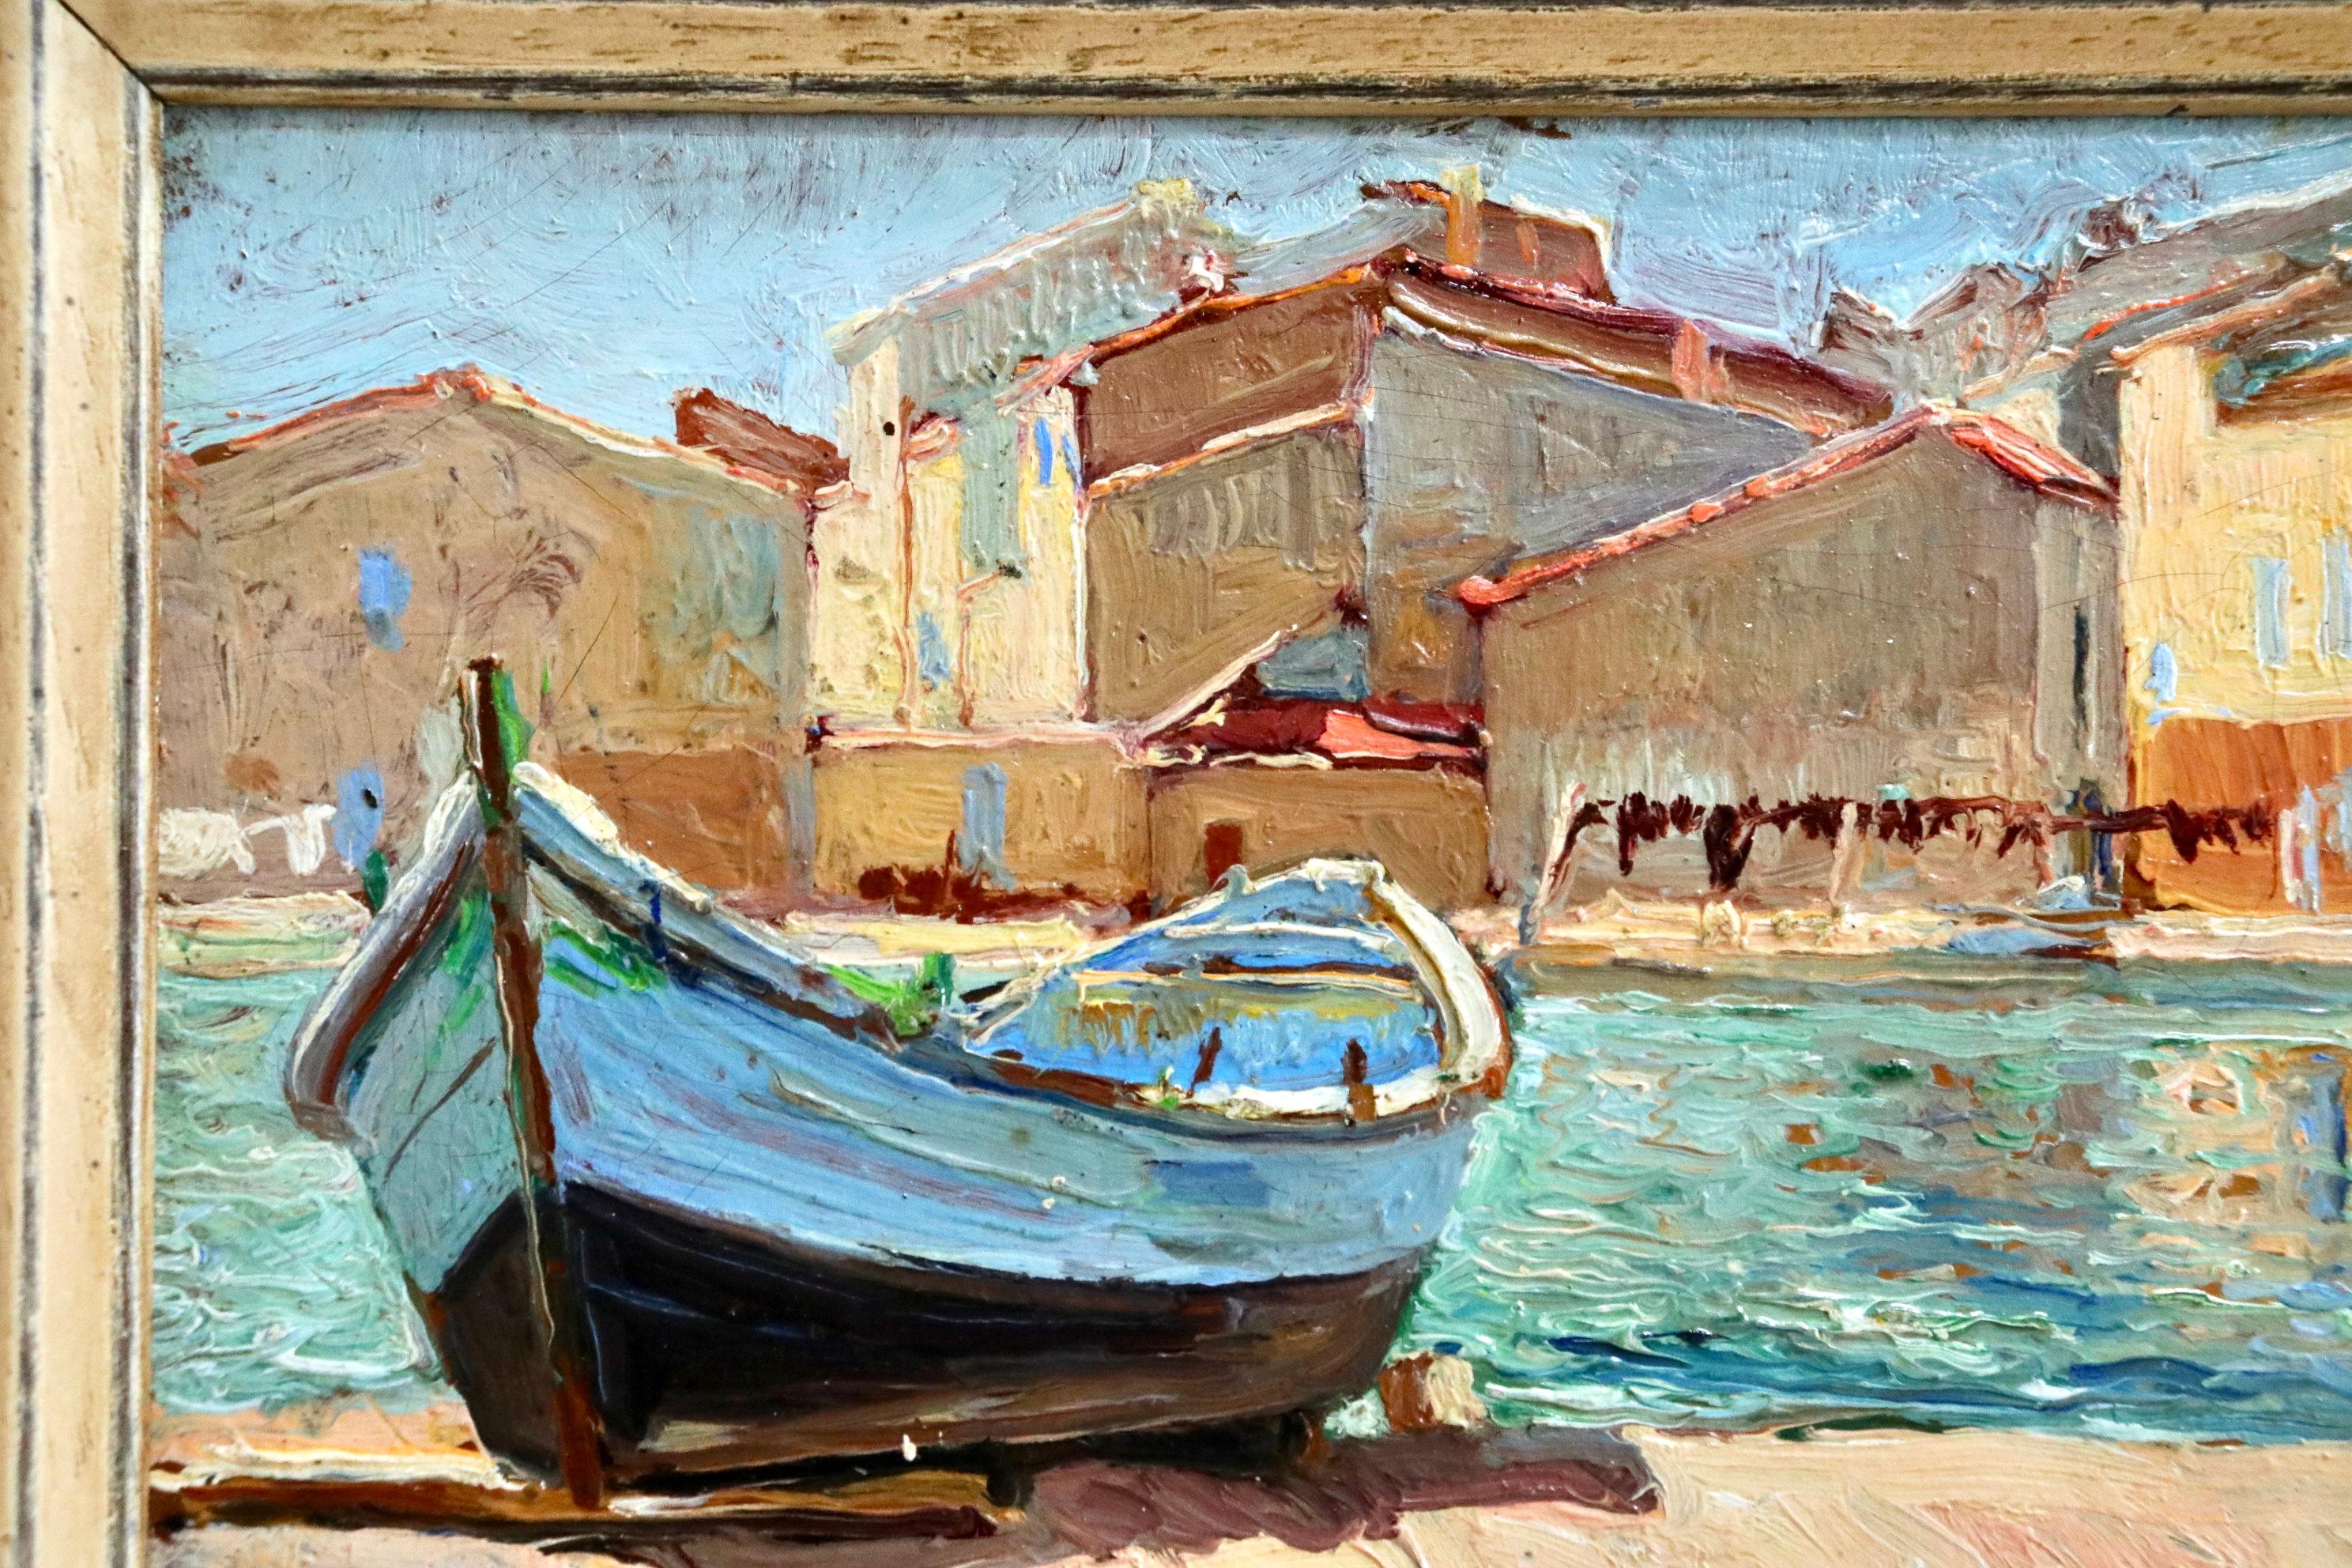 Martigues - 20th Century Oil, Boat by Canal Landscape by Georges Lapchine 2